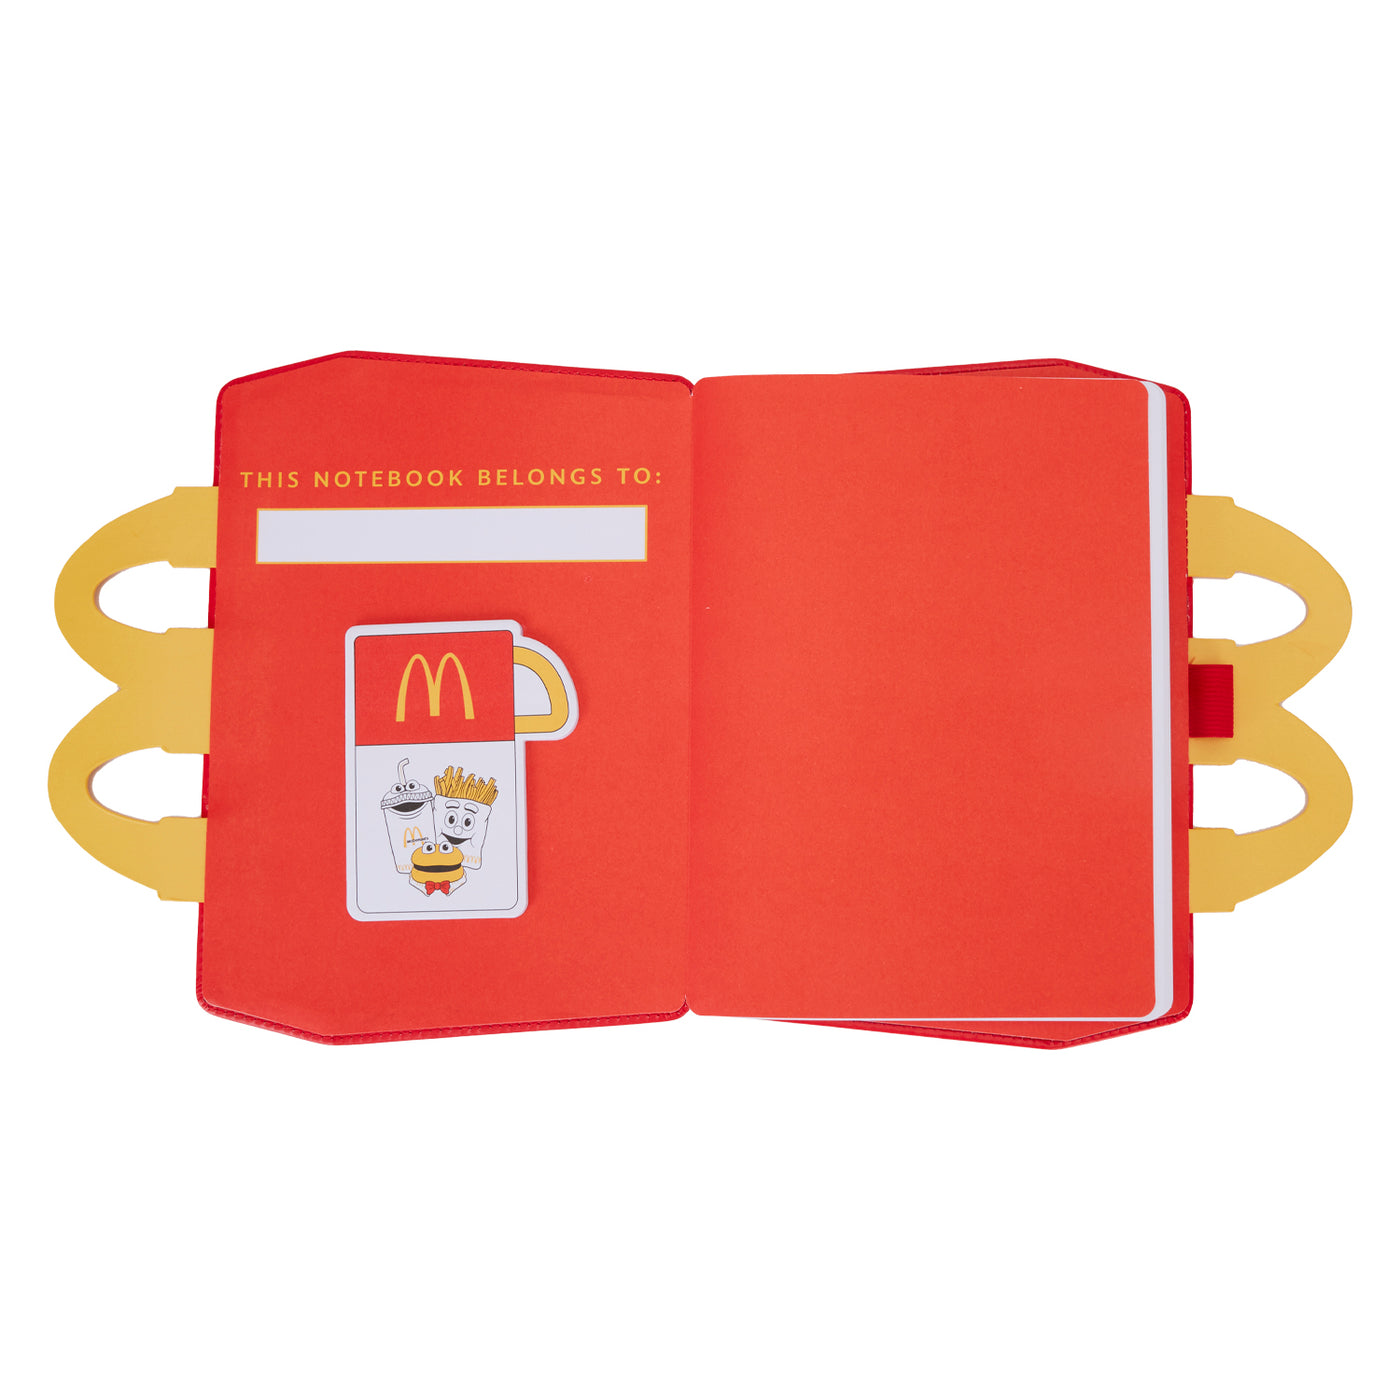 McDonald's Happy Meal Lunchbox Journal